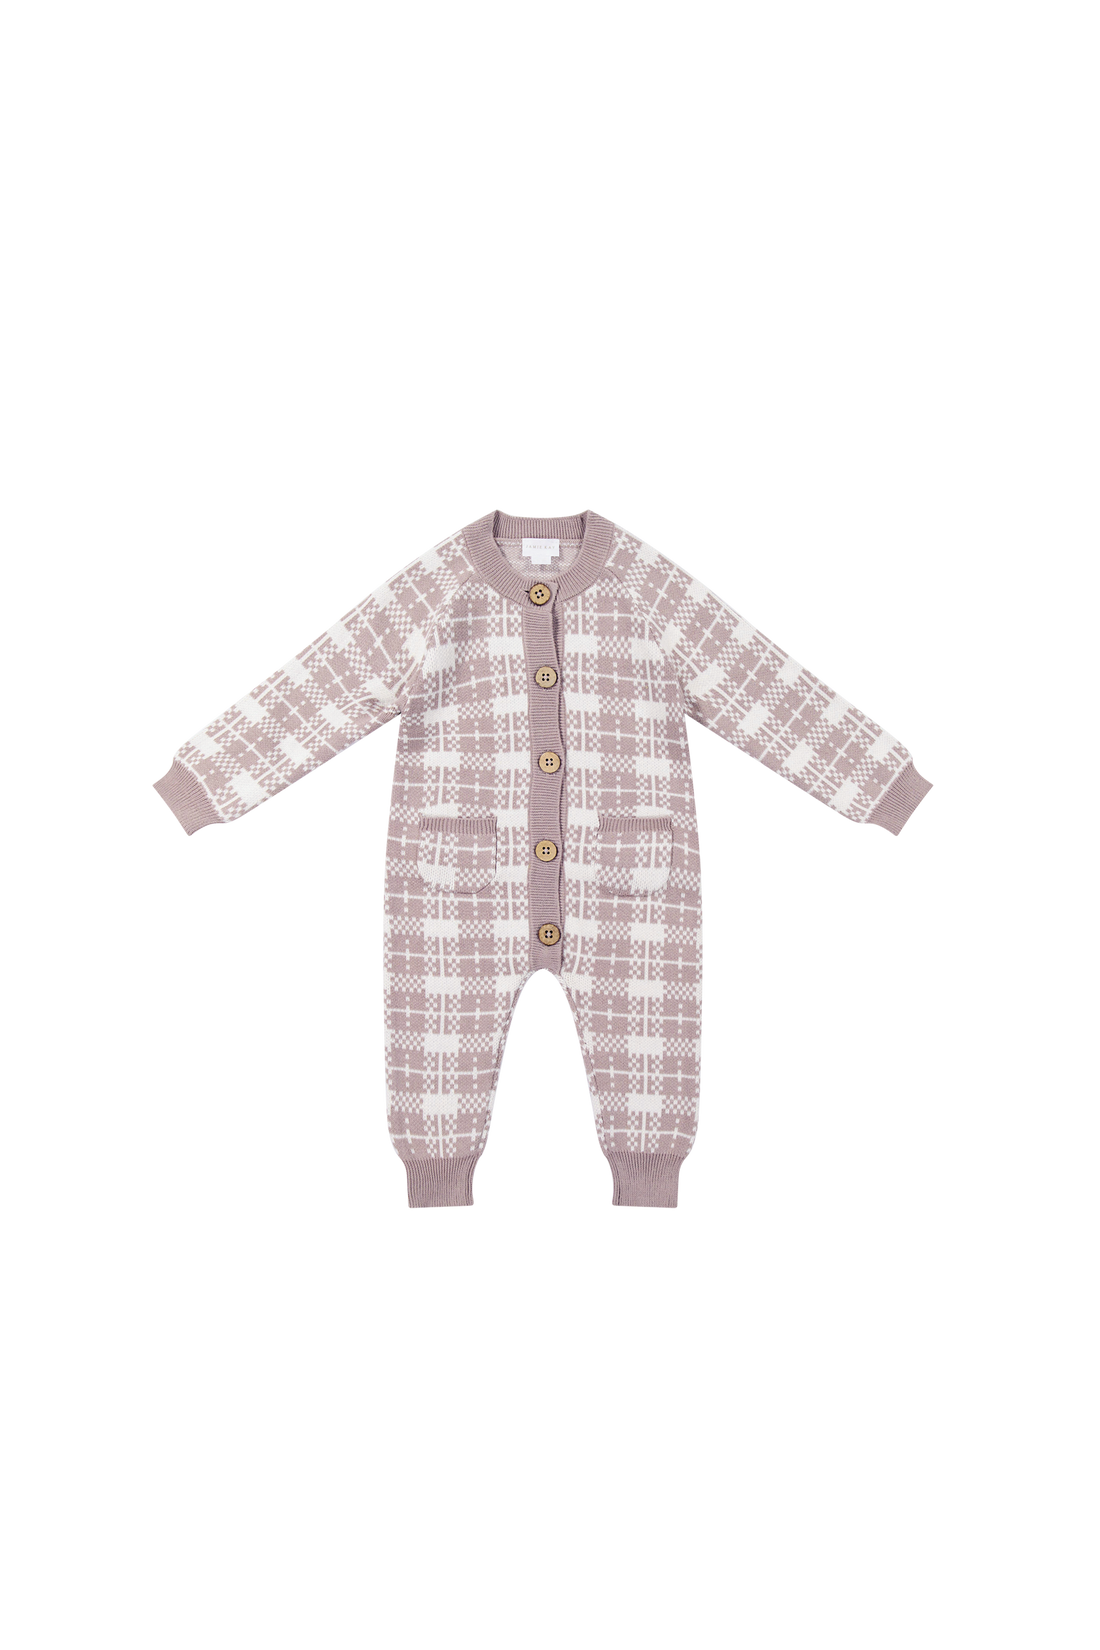 Marlo Knitted Onepiece - Marlo Check Jacquard Doe Childrens Onepiece from Jamie Kay USA